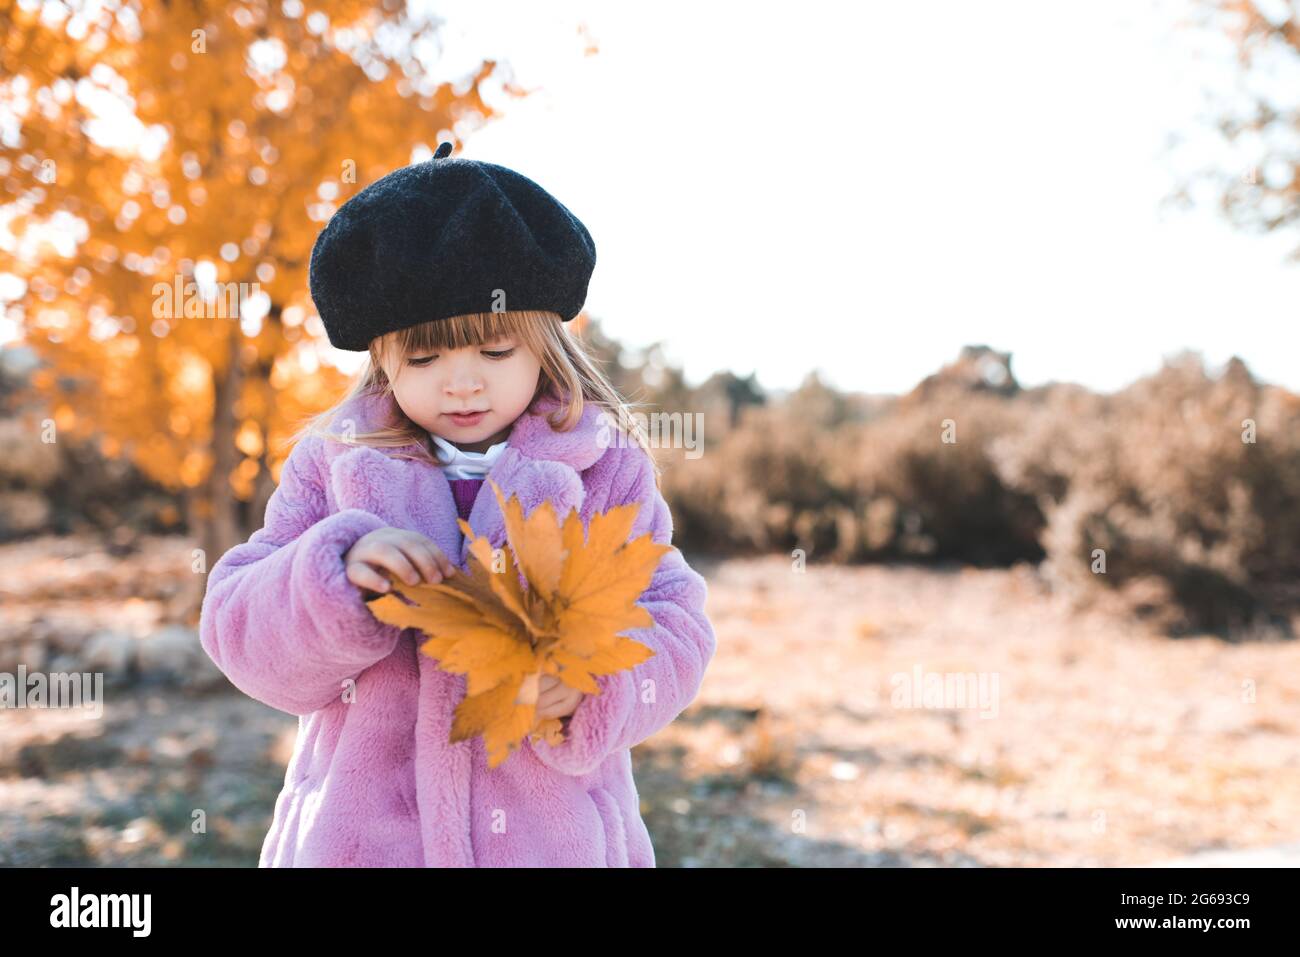 Child girl 3-4 year old wear black beret and fluffy pink autumn coat in park over yellow leaves outdoors close up. Fall season. Happiness. Stock Photo